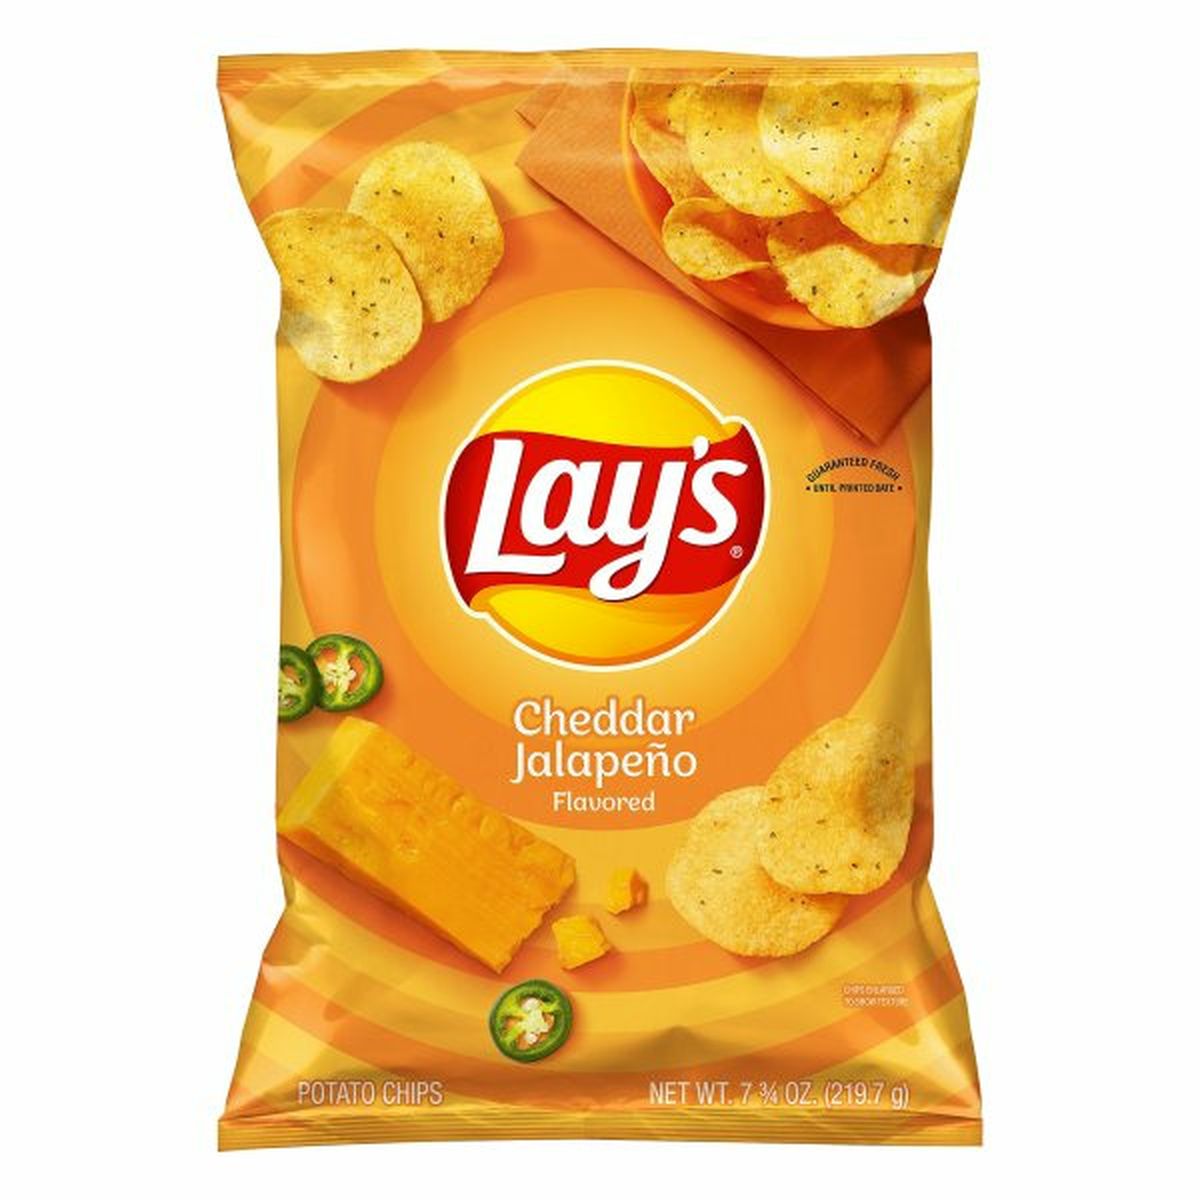 Calories in Lay's Potato Chips, Cheddar Jalapeno Flavored